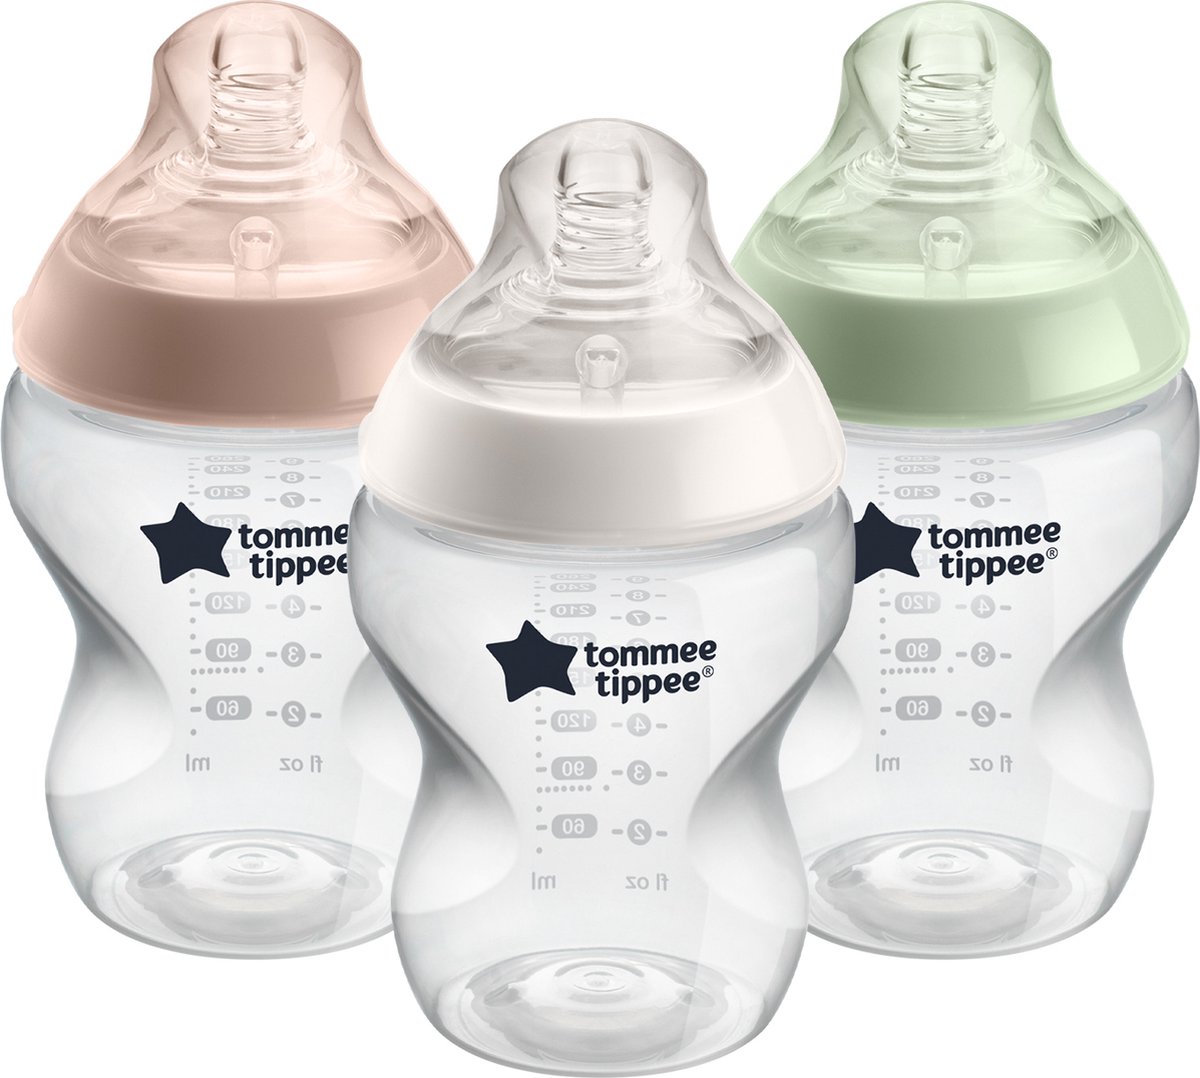 Sucettes Closer to Nature forme naturelle Jour de Tommee Tippee